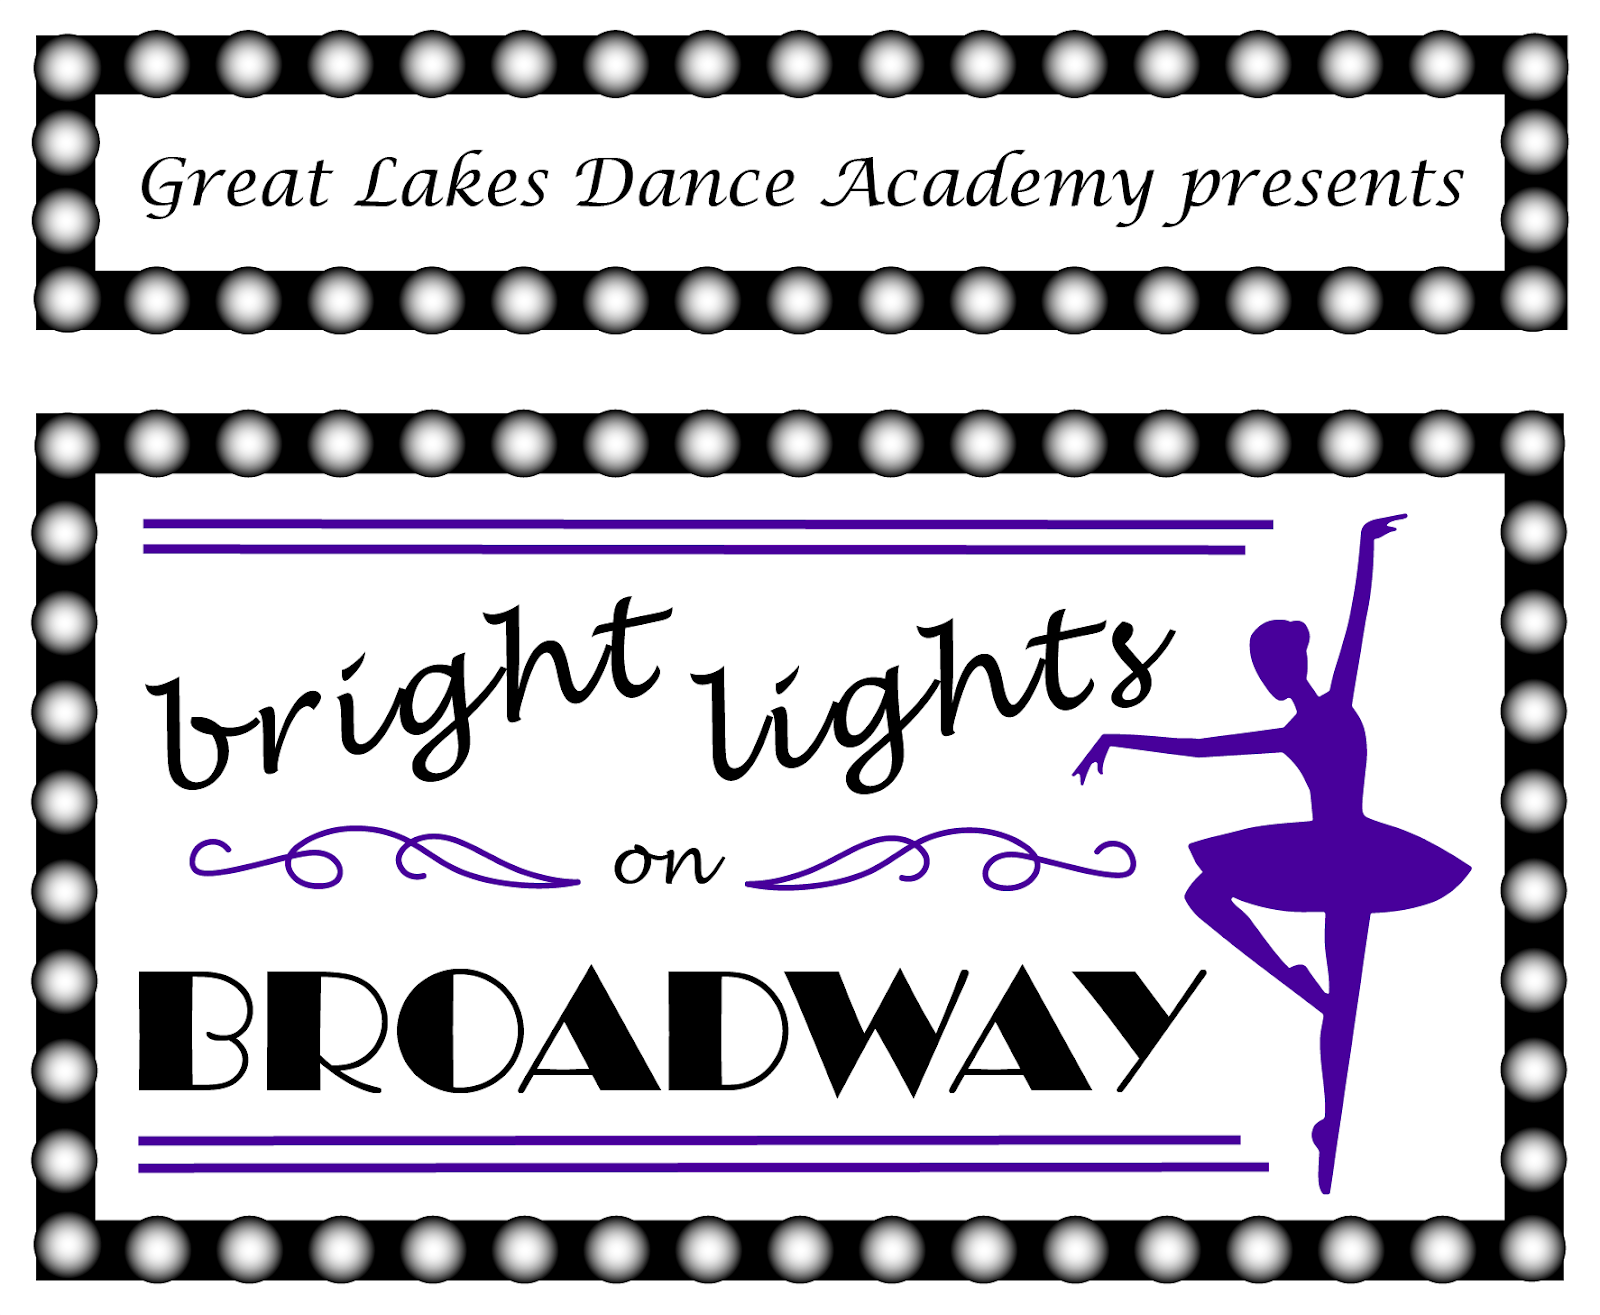 Bright Lights On Broadway - 15th Annual Spring Recital